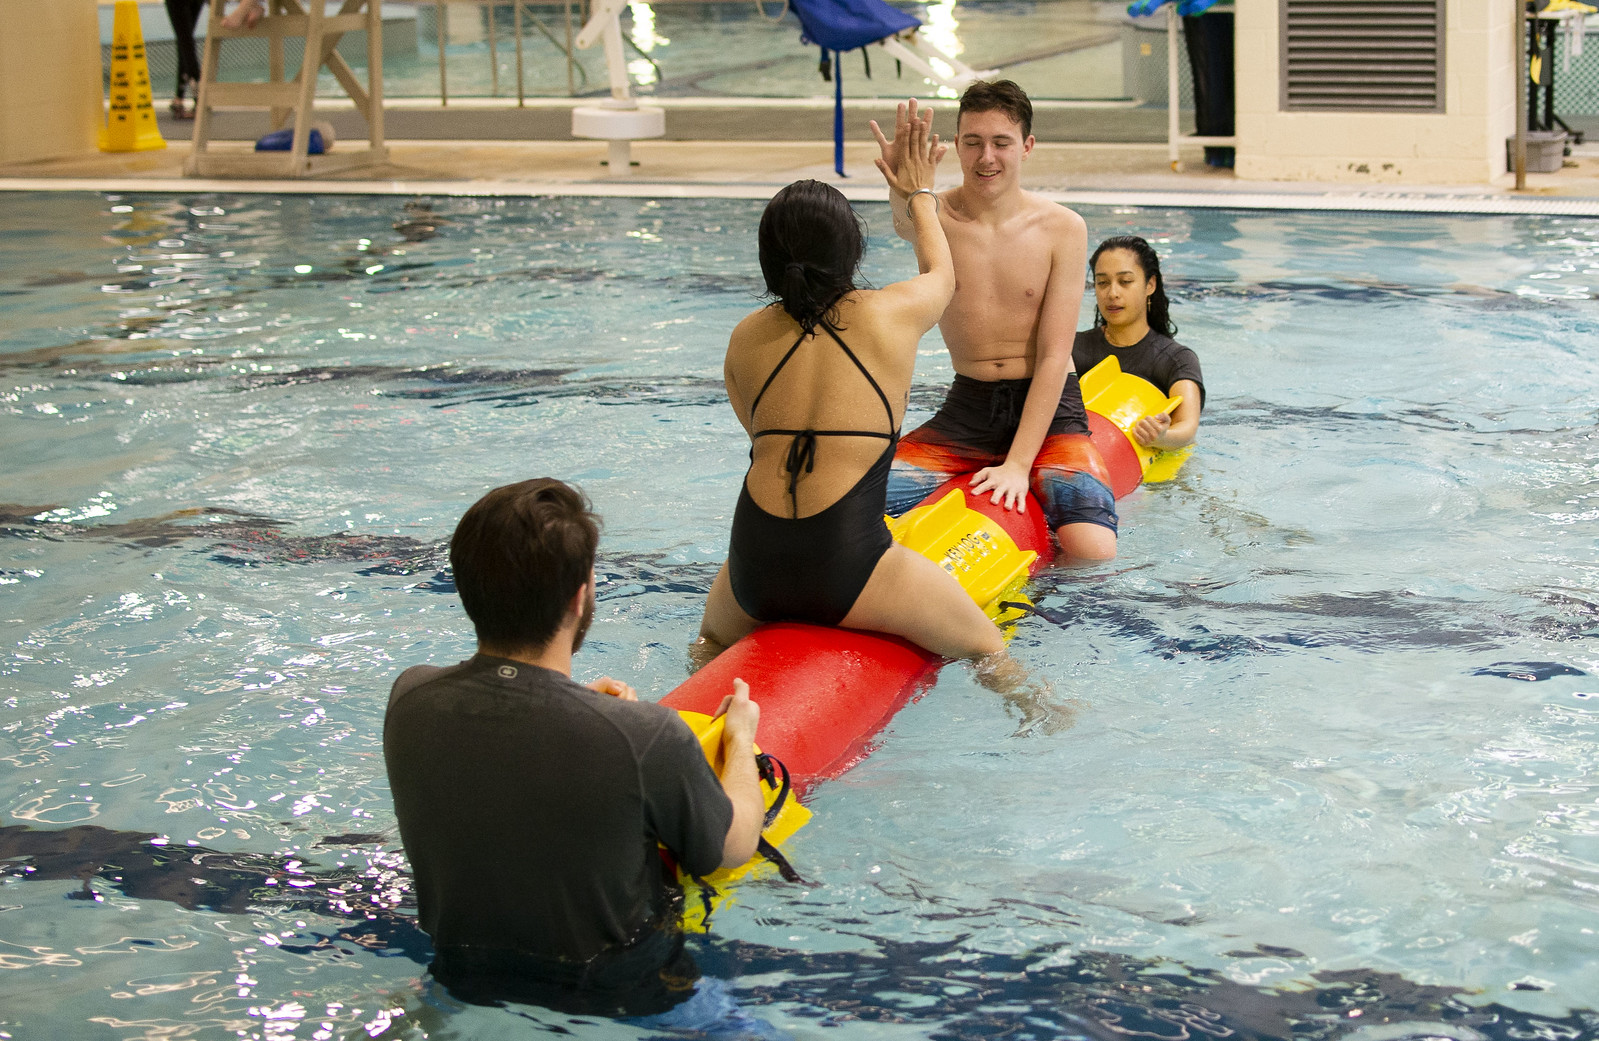 Two students high-fiving on a log in the pool while two other students hold the log steady.